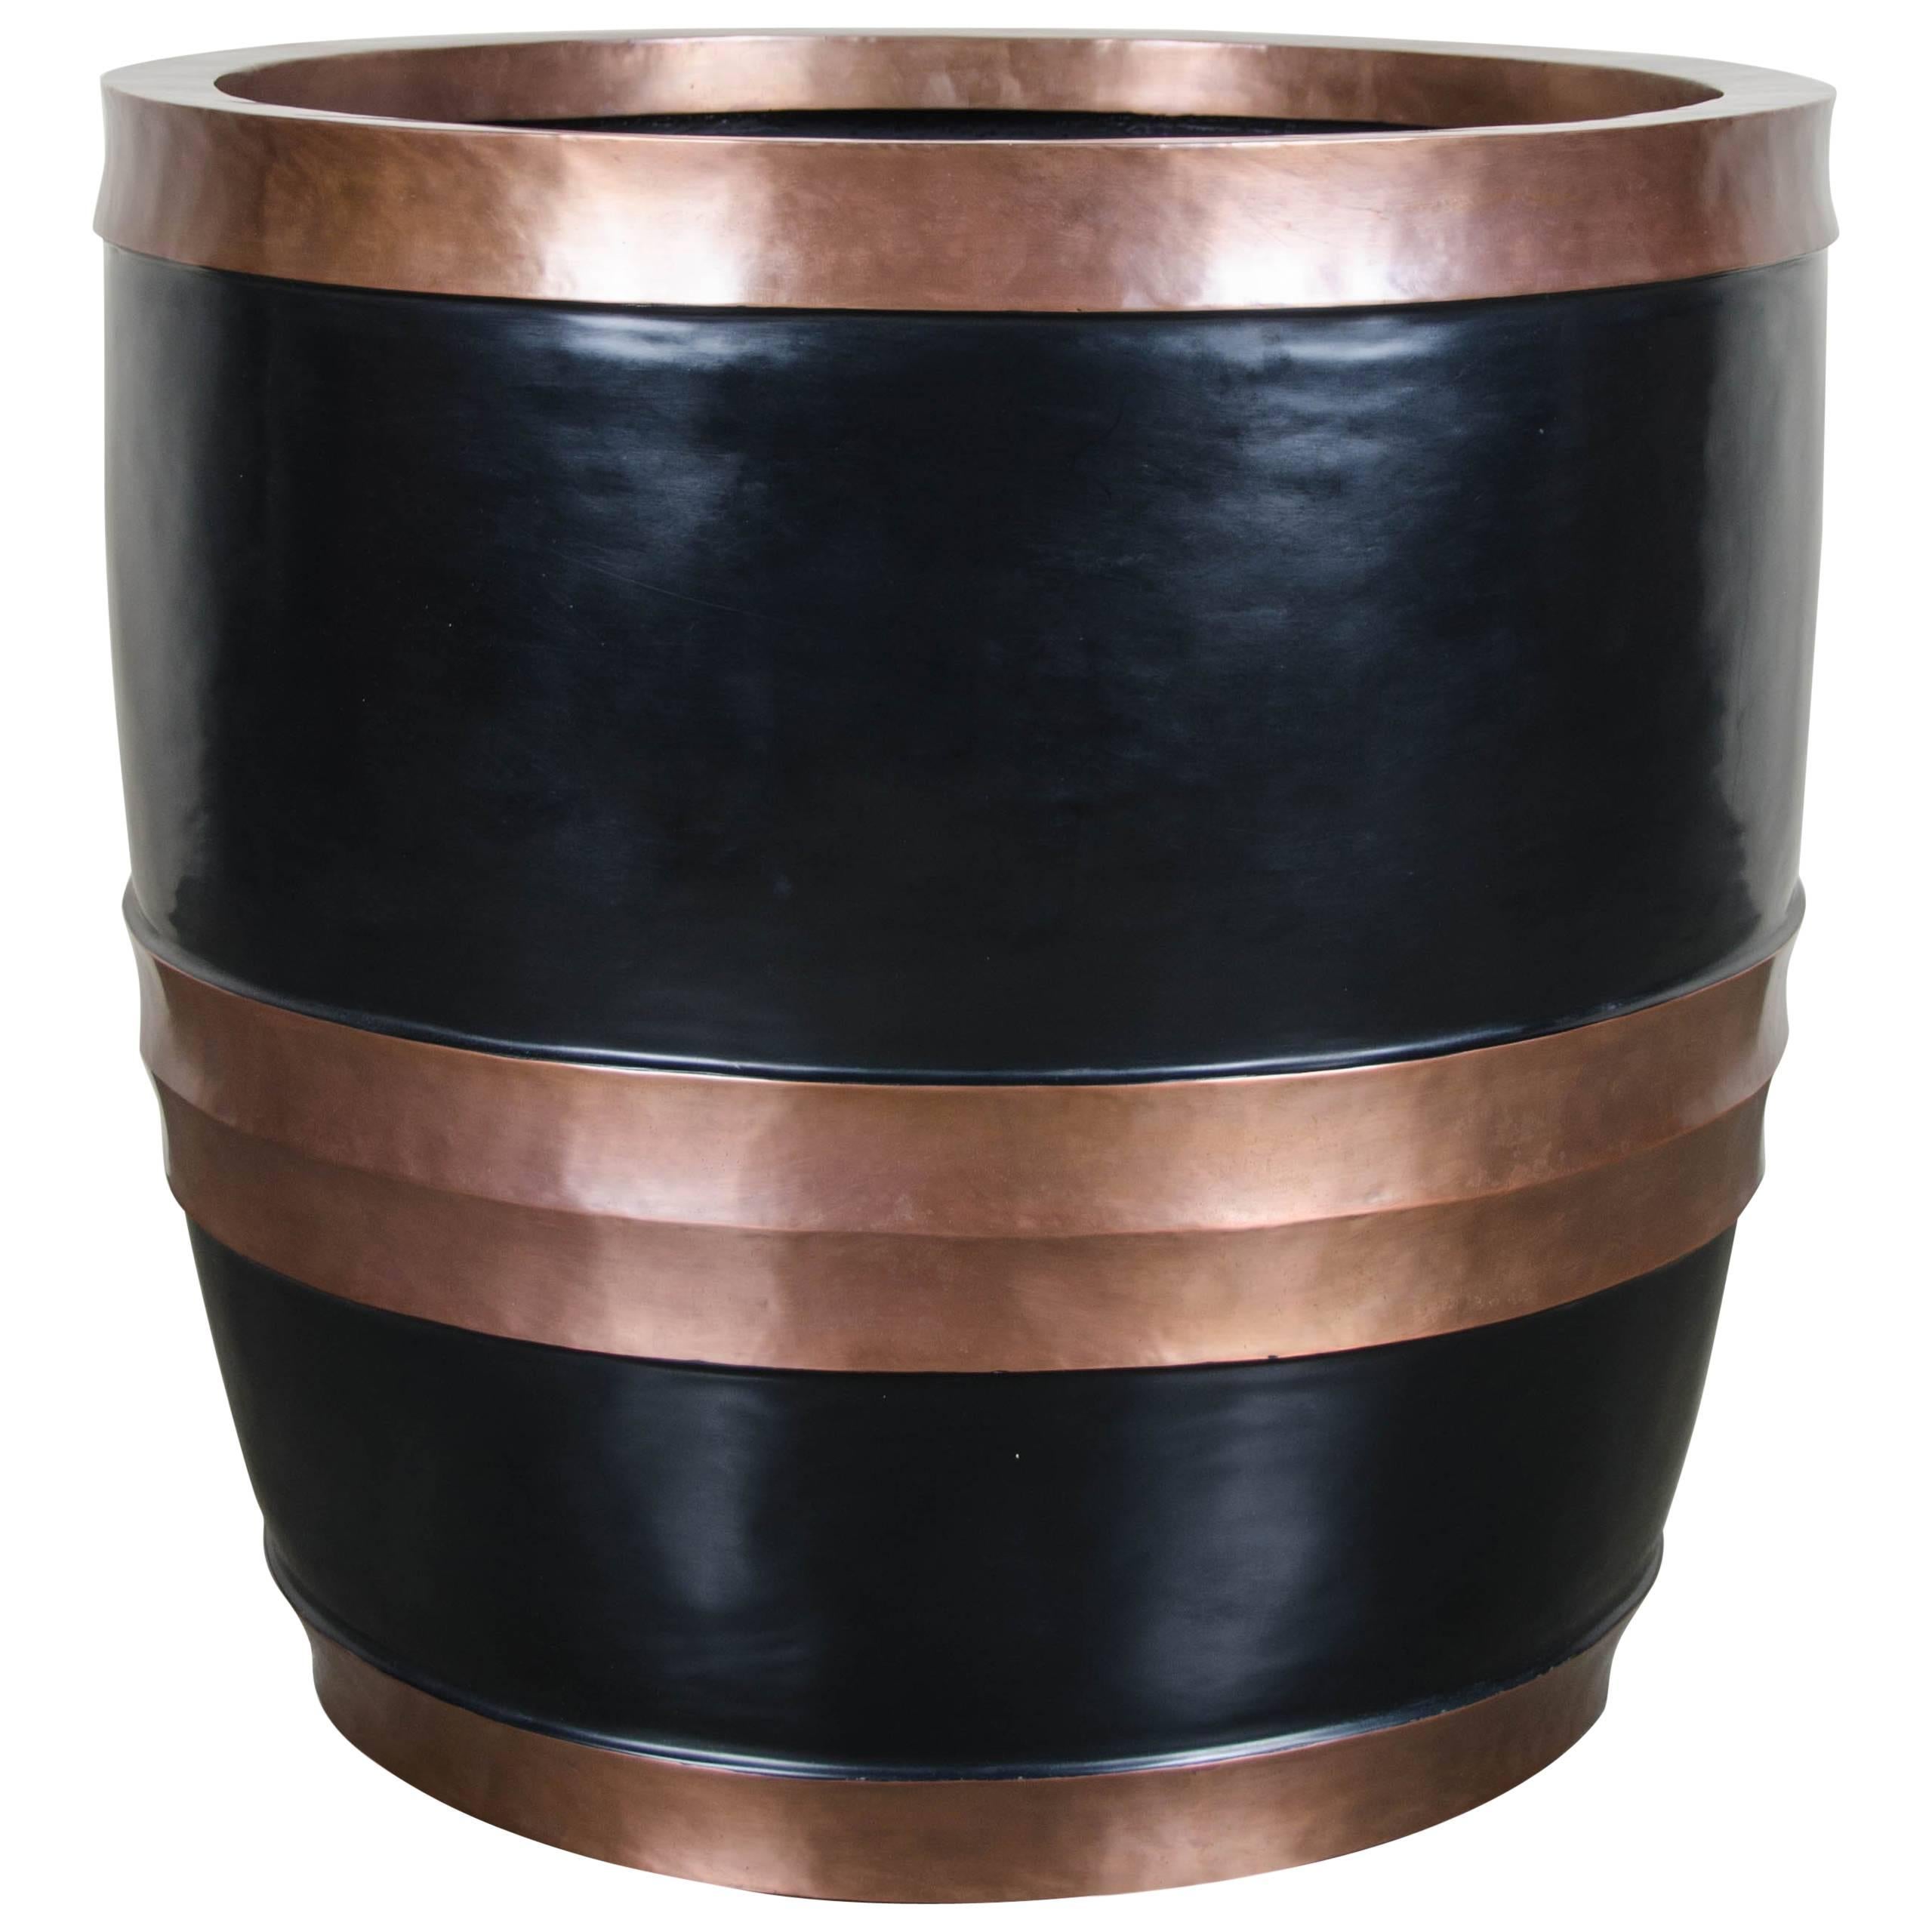 Temple Bell Small Pot with Copper Bands, Black Lacquer by Robert Kuo For Sale